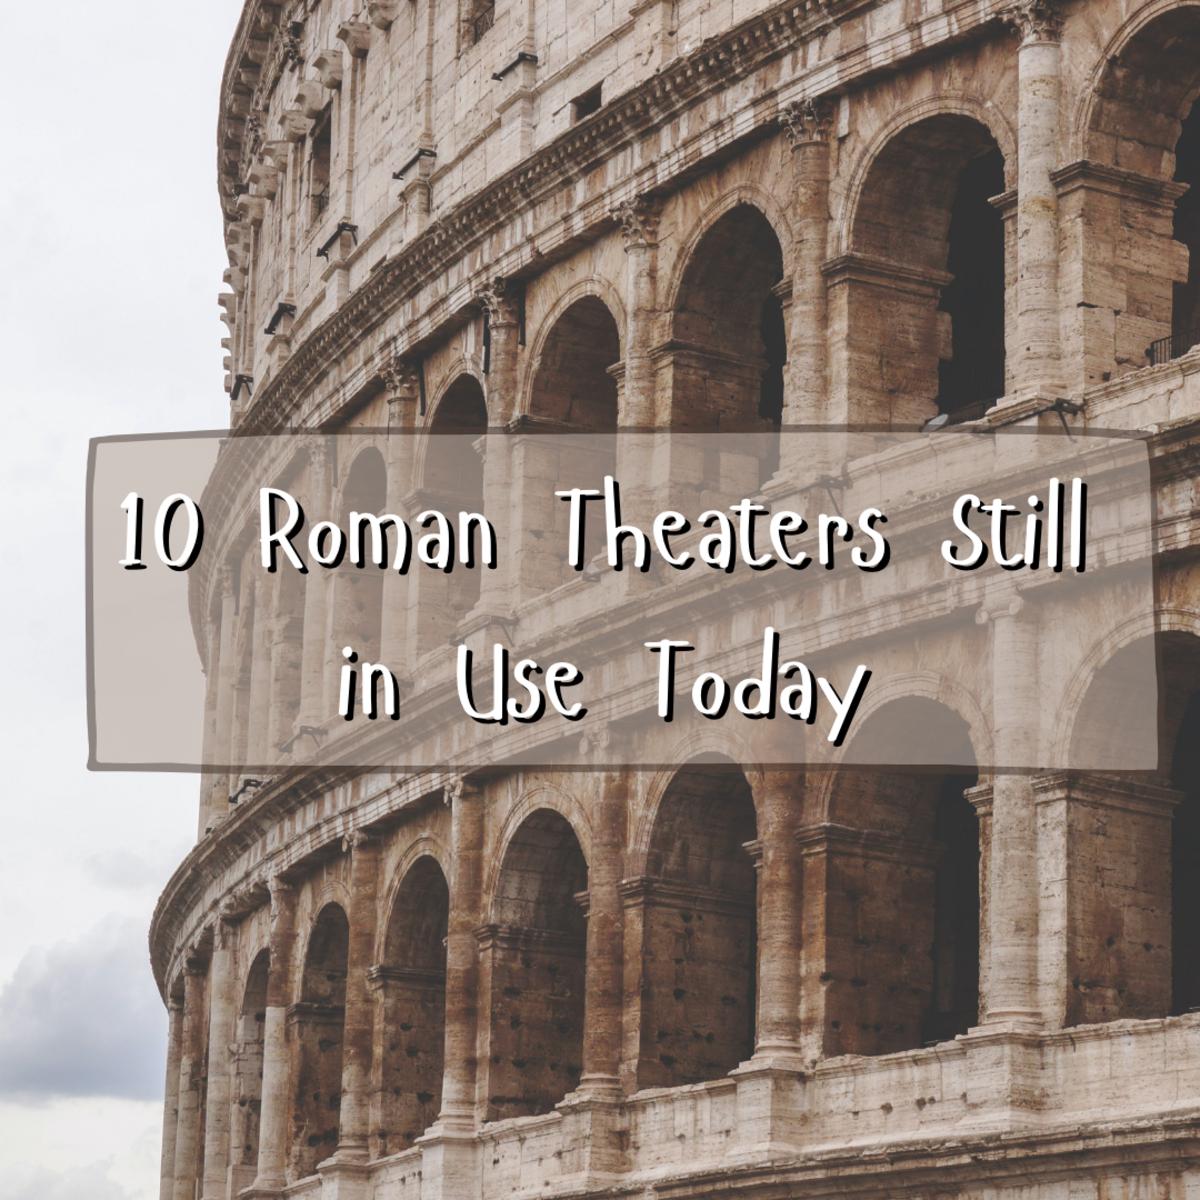 This article contains information and details on 10 Roman theaters that are still in use today.